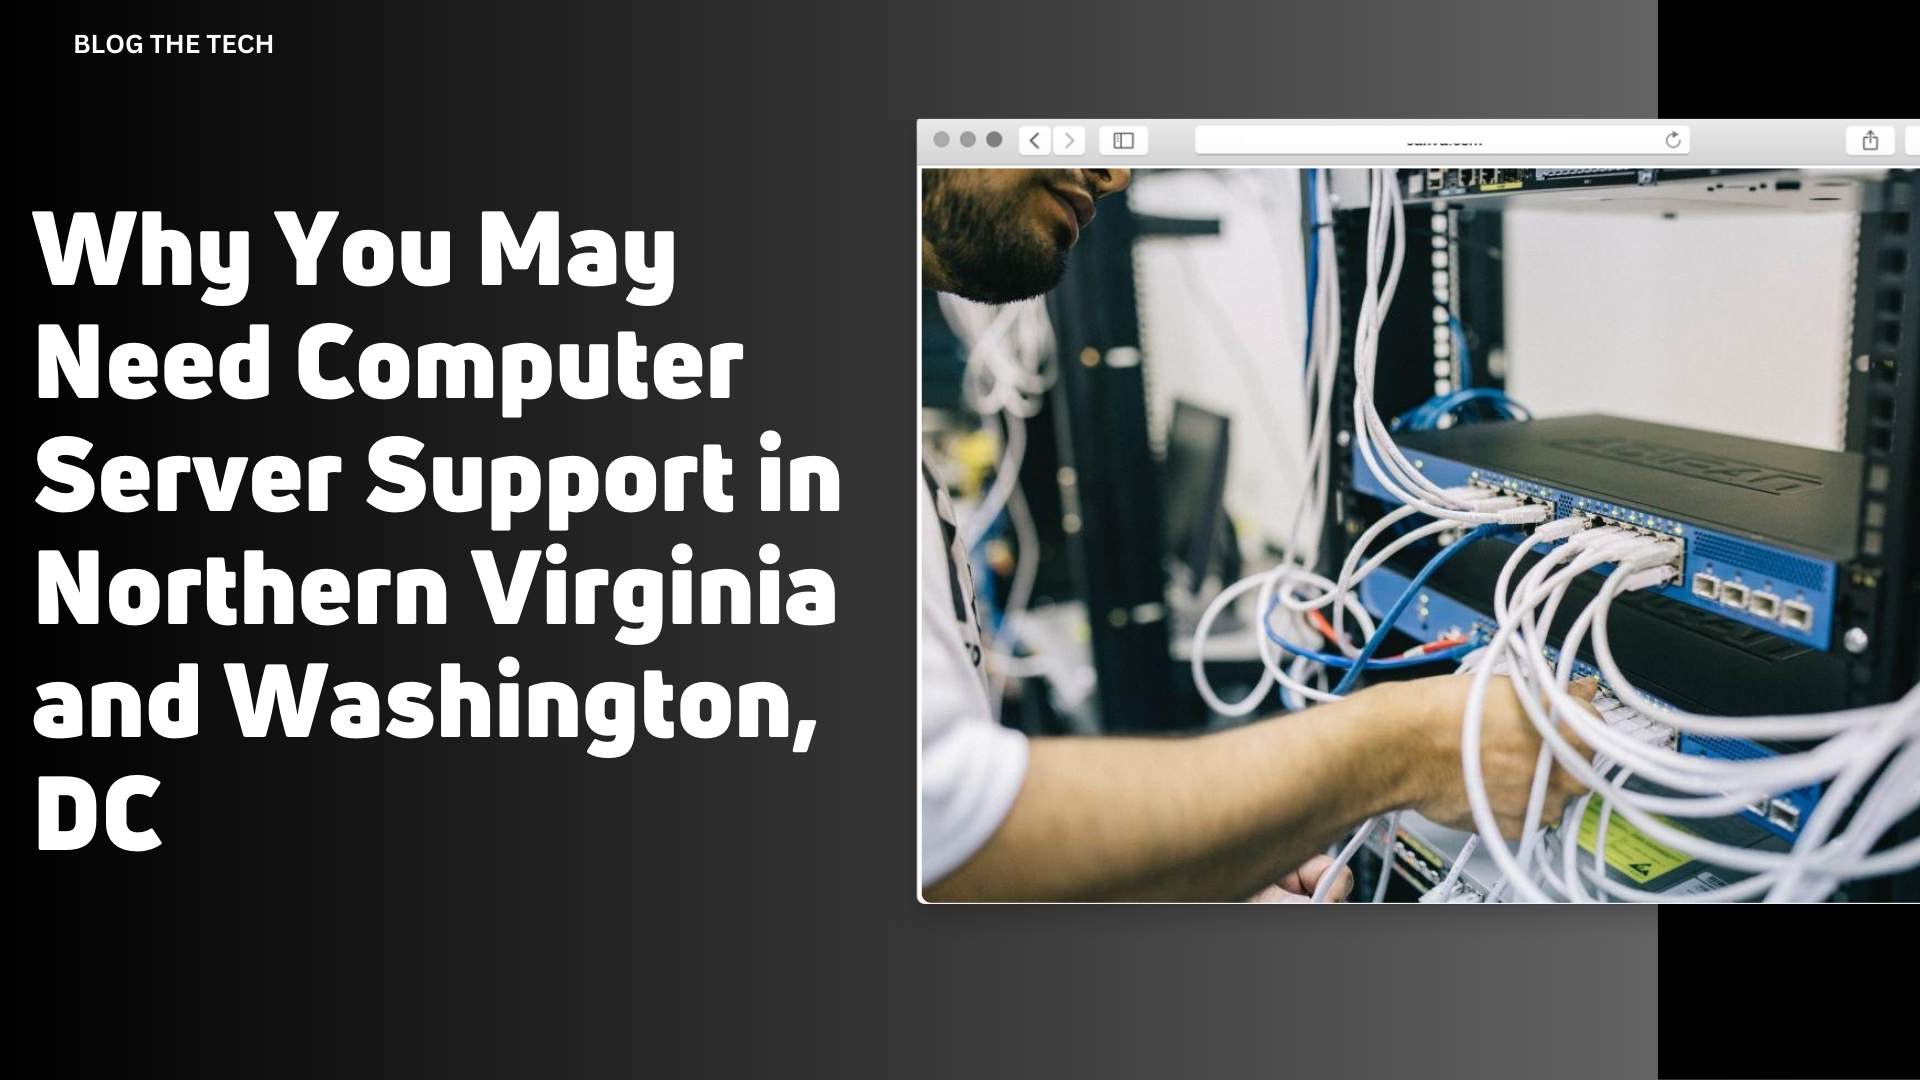 Why You May Need Computer Server Support in Northern Virginia and Washington DC